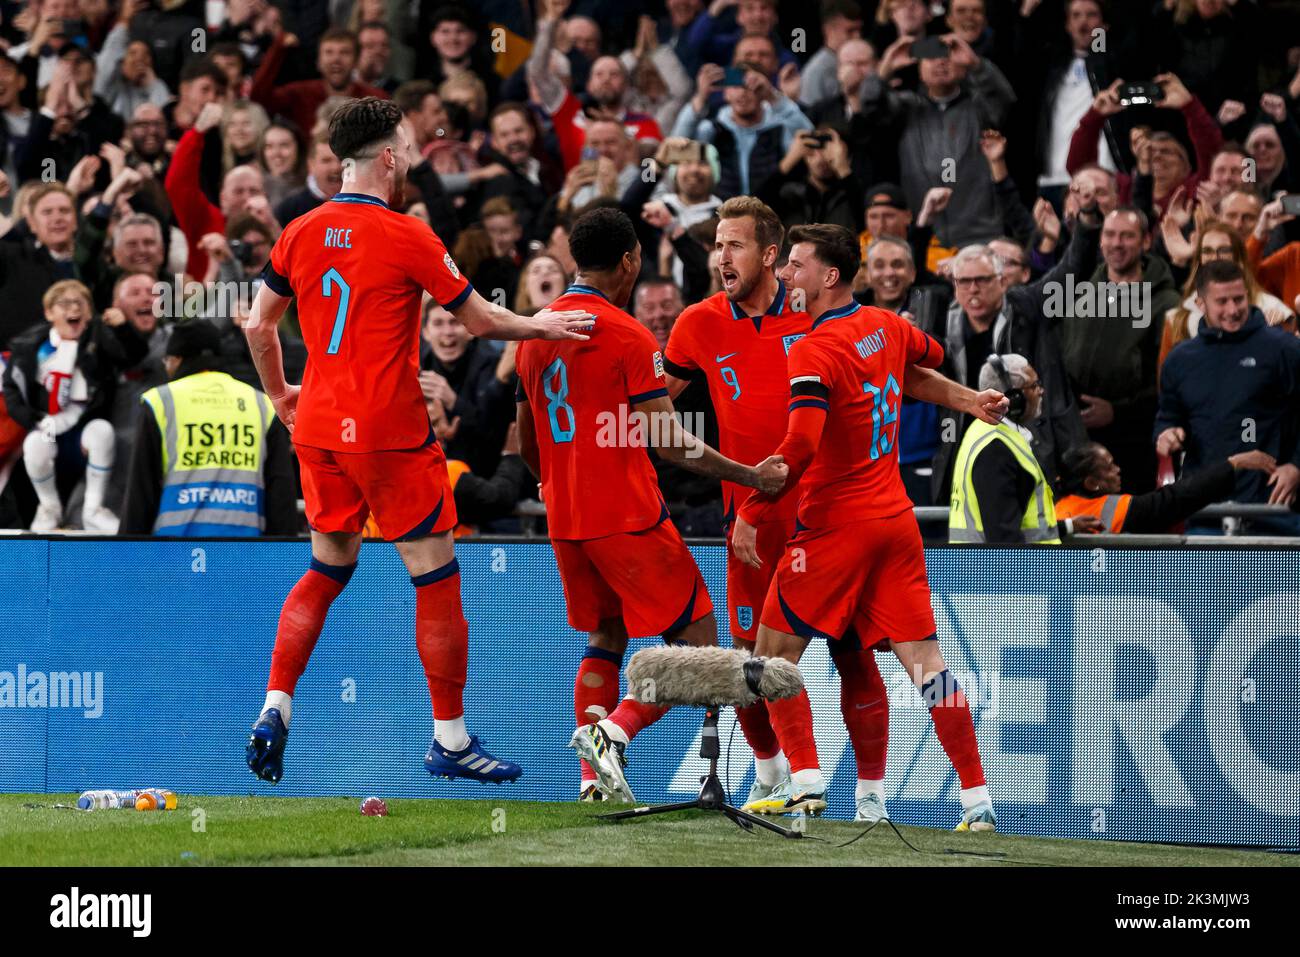 London, UK. 26th Sep, 2022. Harry Kane of England celebrates after scoring their third goal to make the score 3-2 during the UEFA Nations League Group C match between England and Germany at Wembley Stadium on September 26th 2022 in London, England. (Photo by Daniel Chesterton/phcimages.com) Credit: PHC Images/Alamy Live News Stock Photo